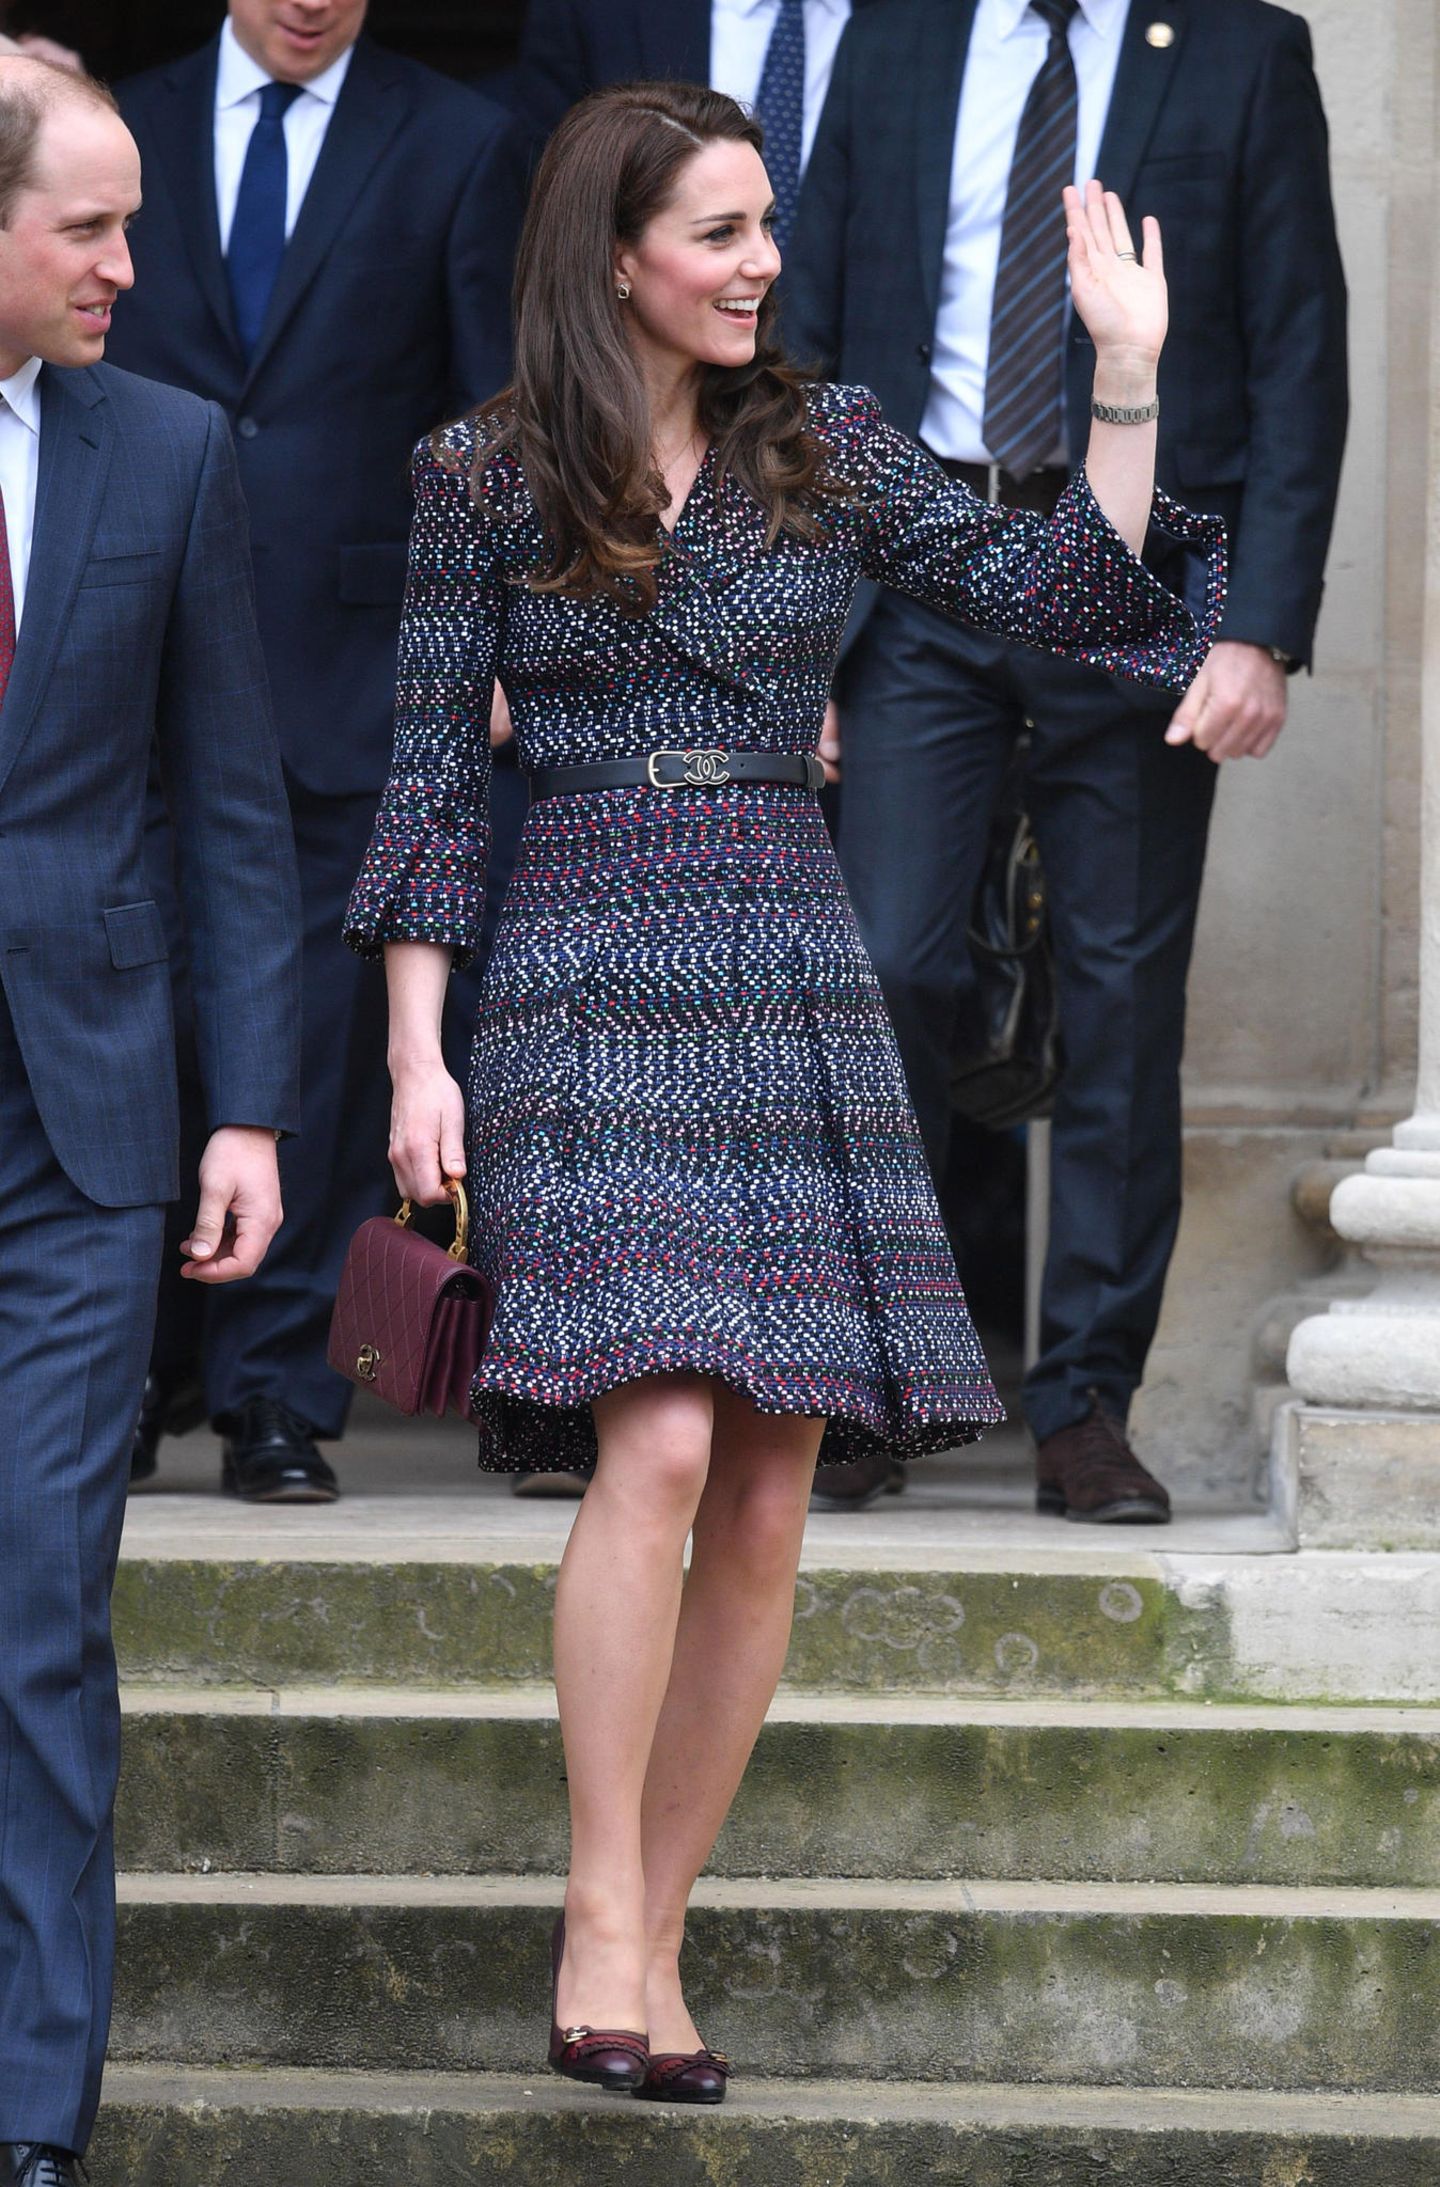 Chanel-Looks: Kate Middleton in Chanel